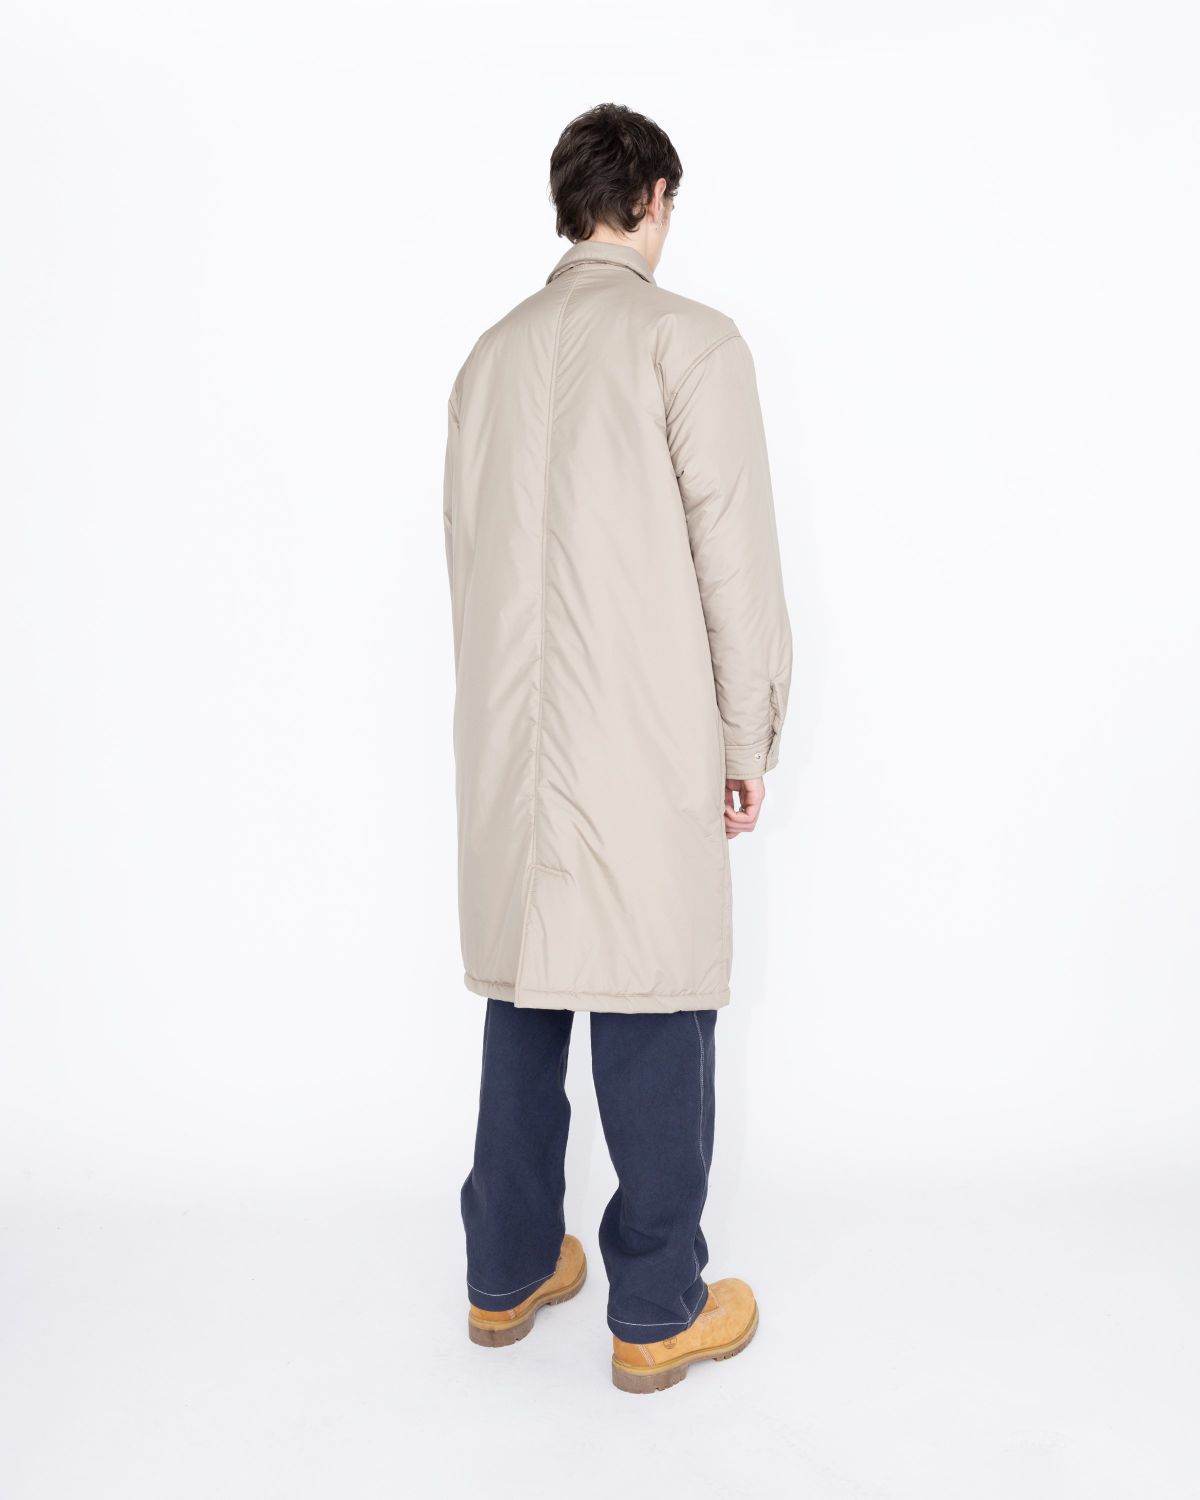 Highsnobiety HS05 – Light Insulated Eco-Poly Trench Coat Beige - Outerwear - Beige - Image 5